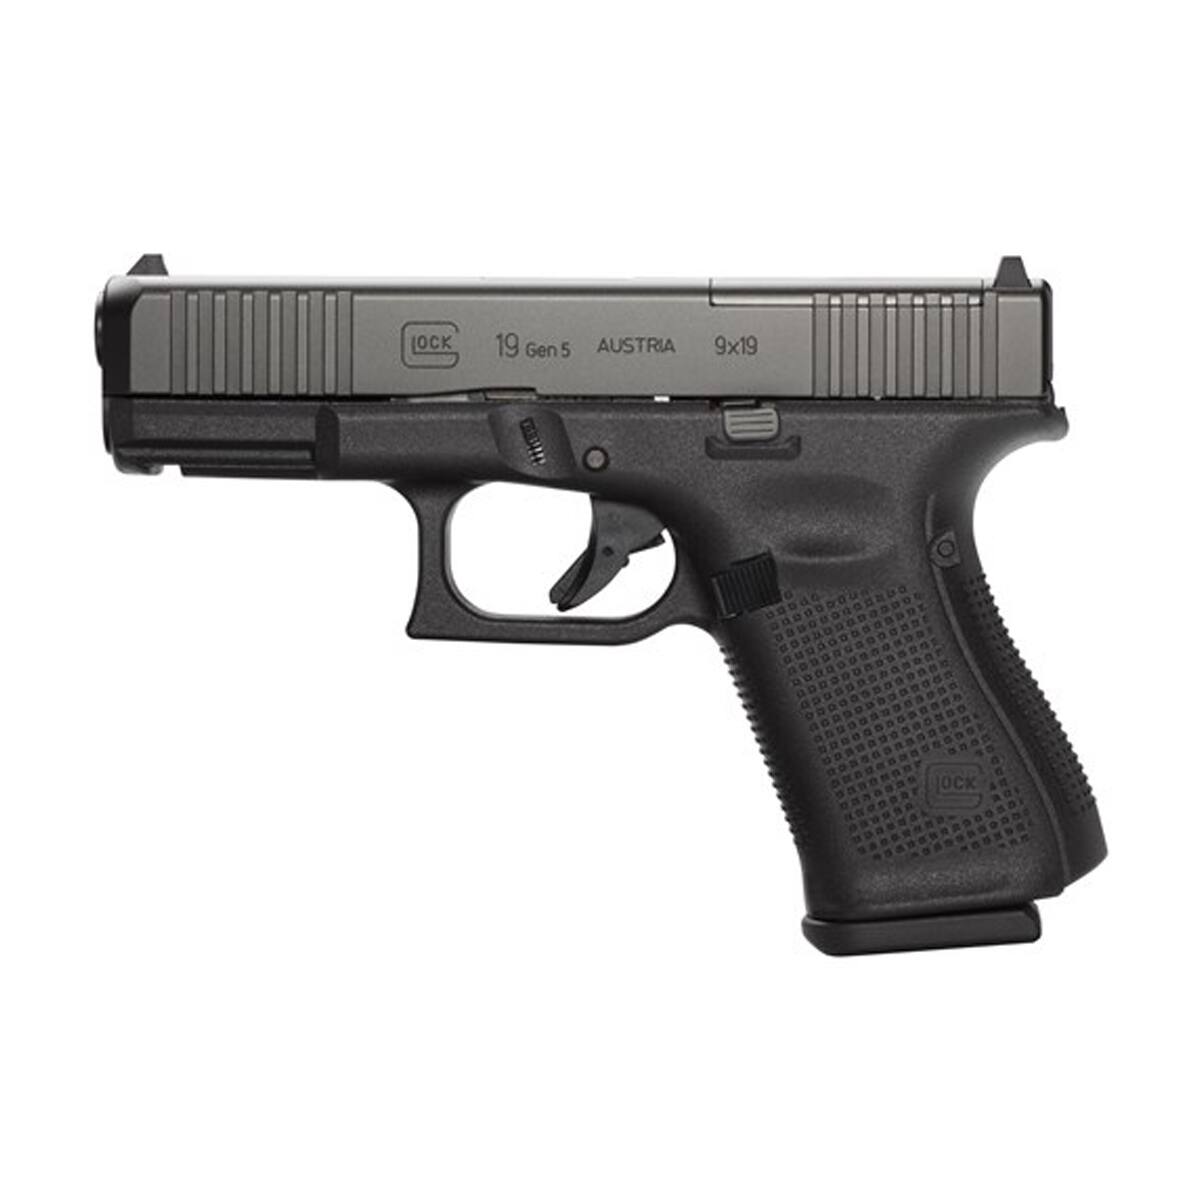 Image of Kahr Arms Pistol CW9-9mm- -CW9093 Display Model